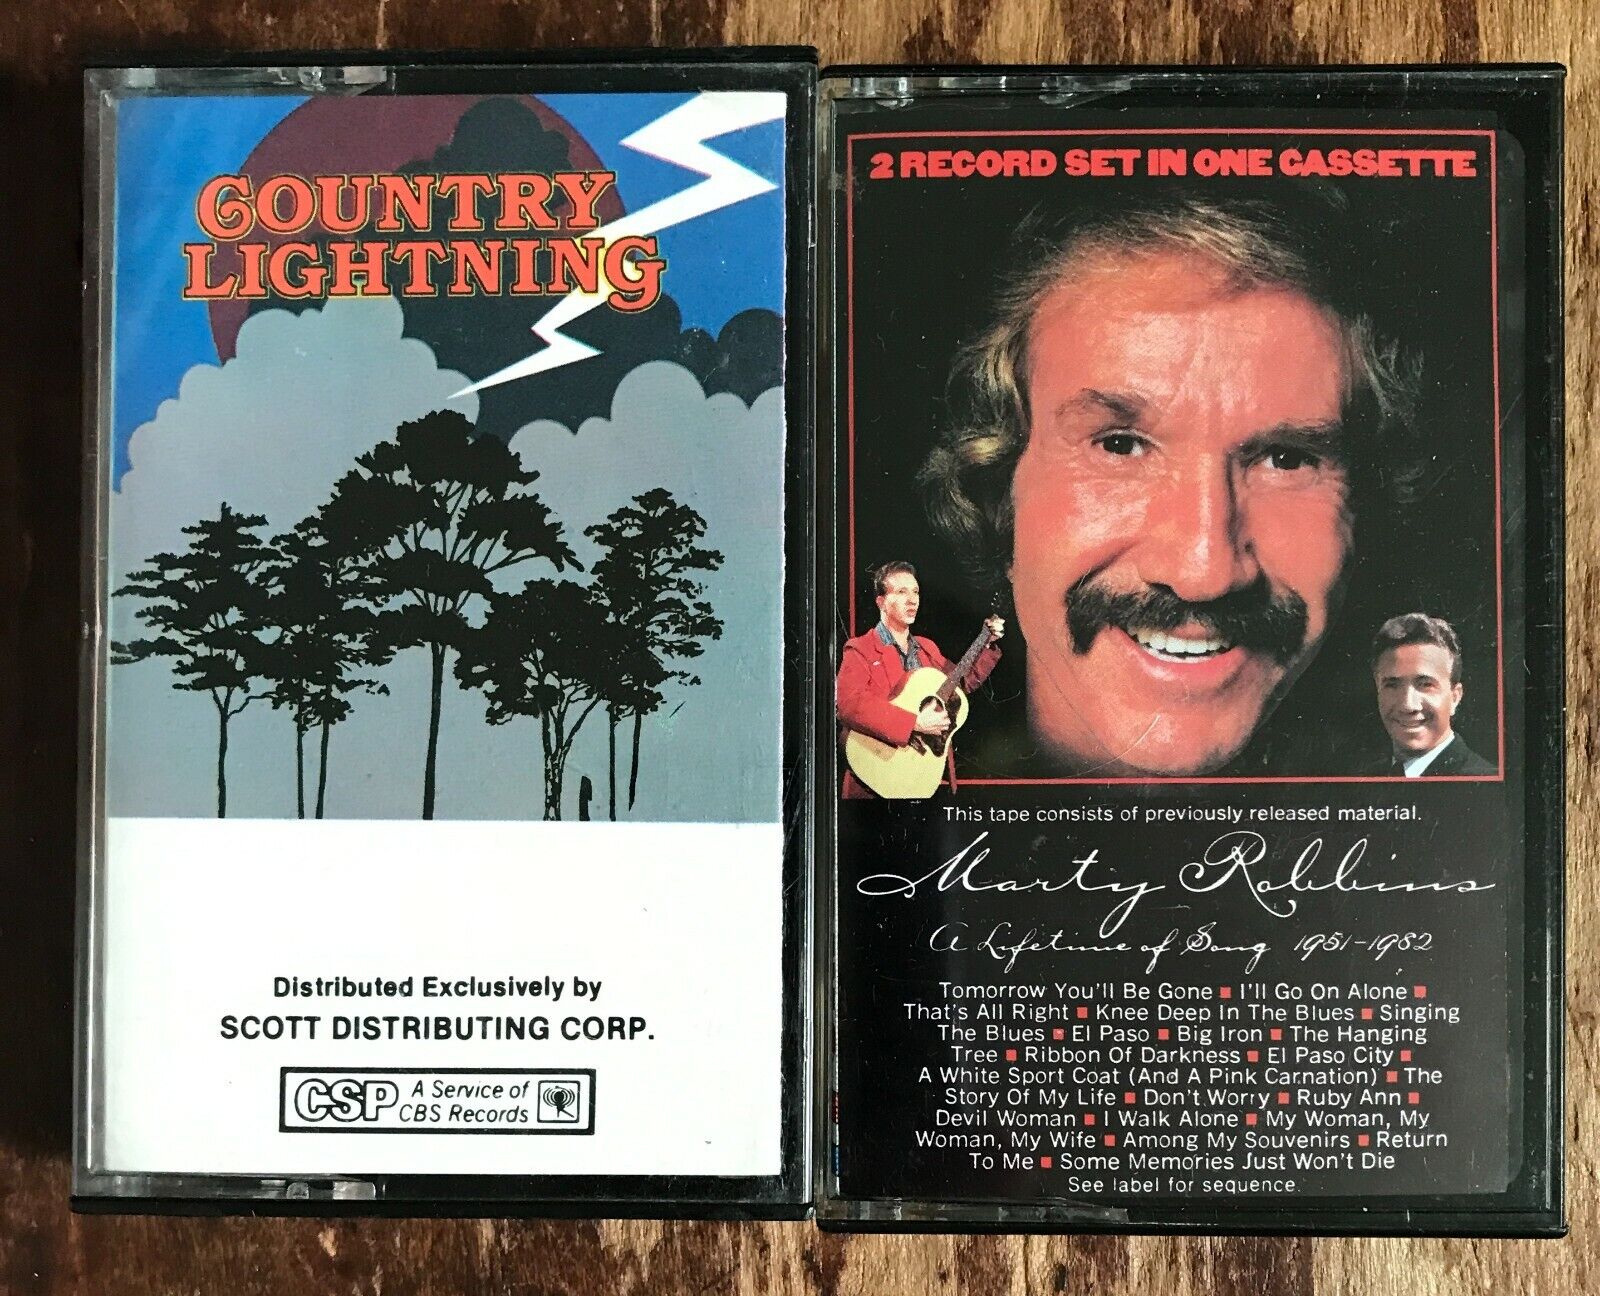 Marty Robbins A Lifetime Of Song (1951-1982) Cassette & Country Lightning Vol. 1